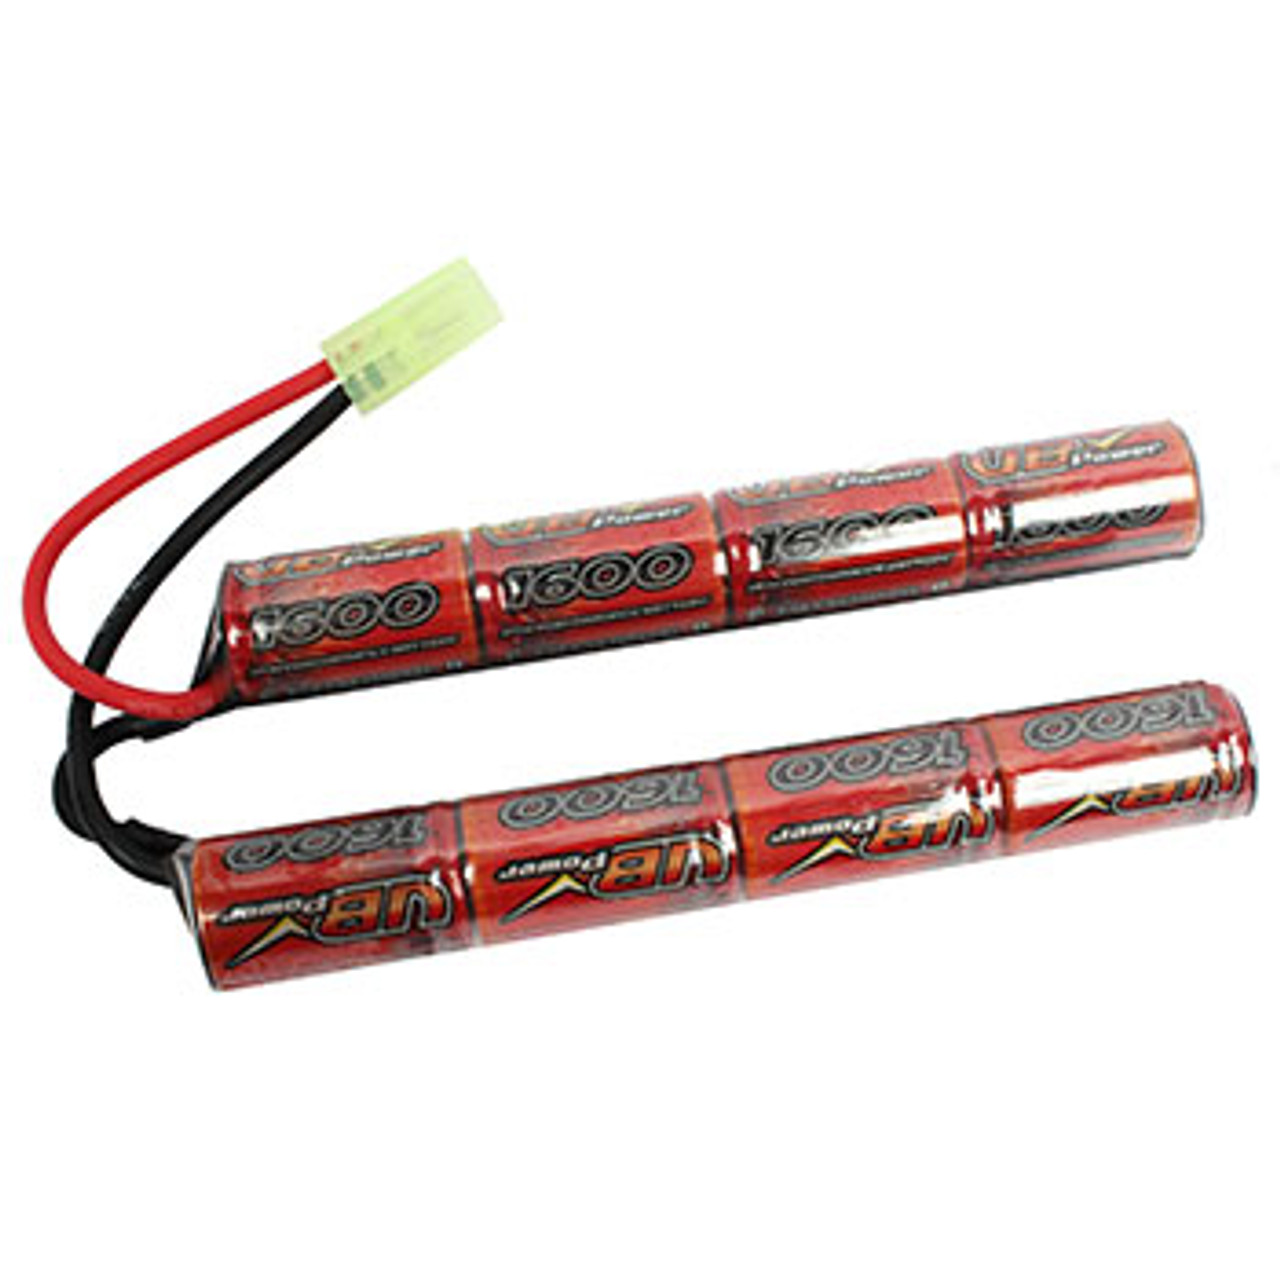 Lancer Tactical Nimh Airsoft Battery Compatible with Lancer AEG Airsoft  (8.4V, 1600 mAh Nunchuck)